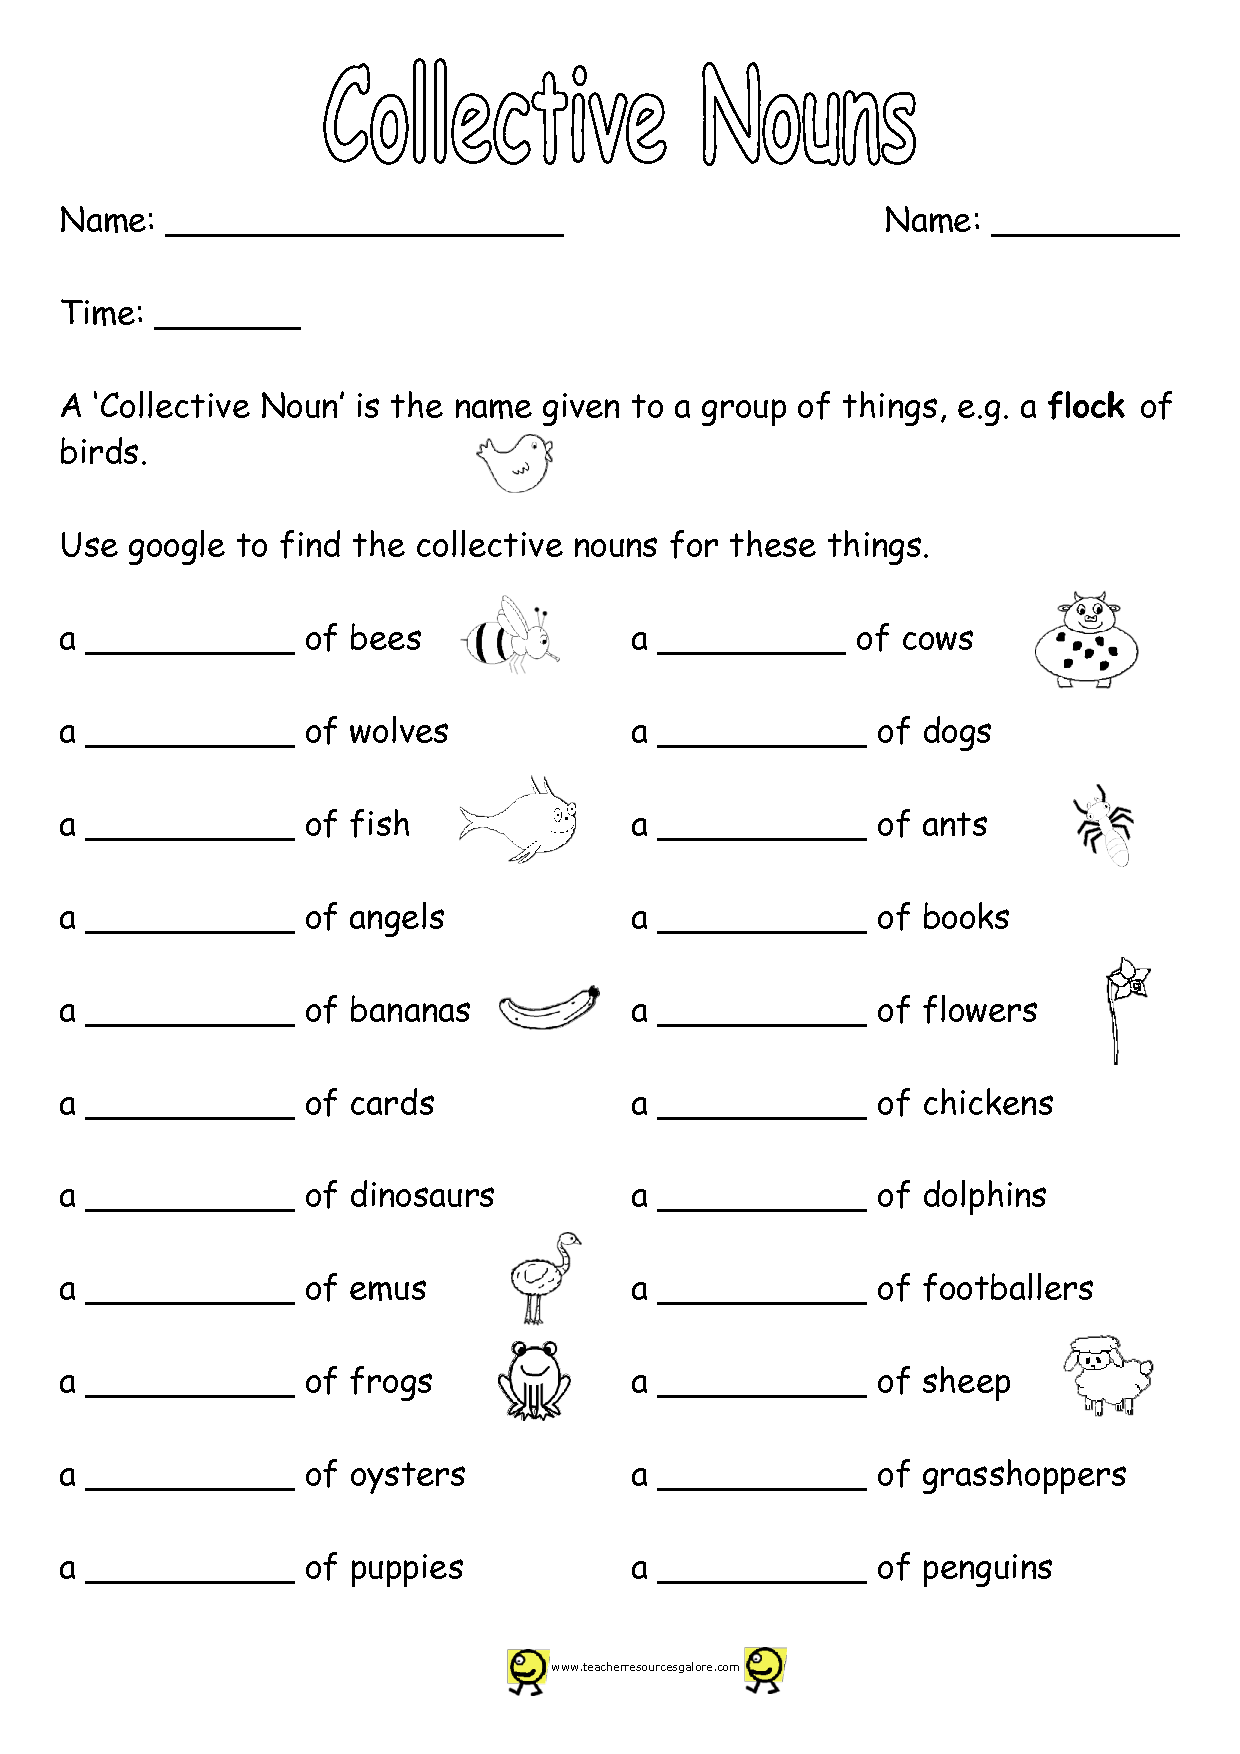 18 Best Images Of Collective Nouns 2nd Grade Worksheet Collective Nouns Worksheet Irregular